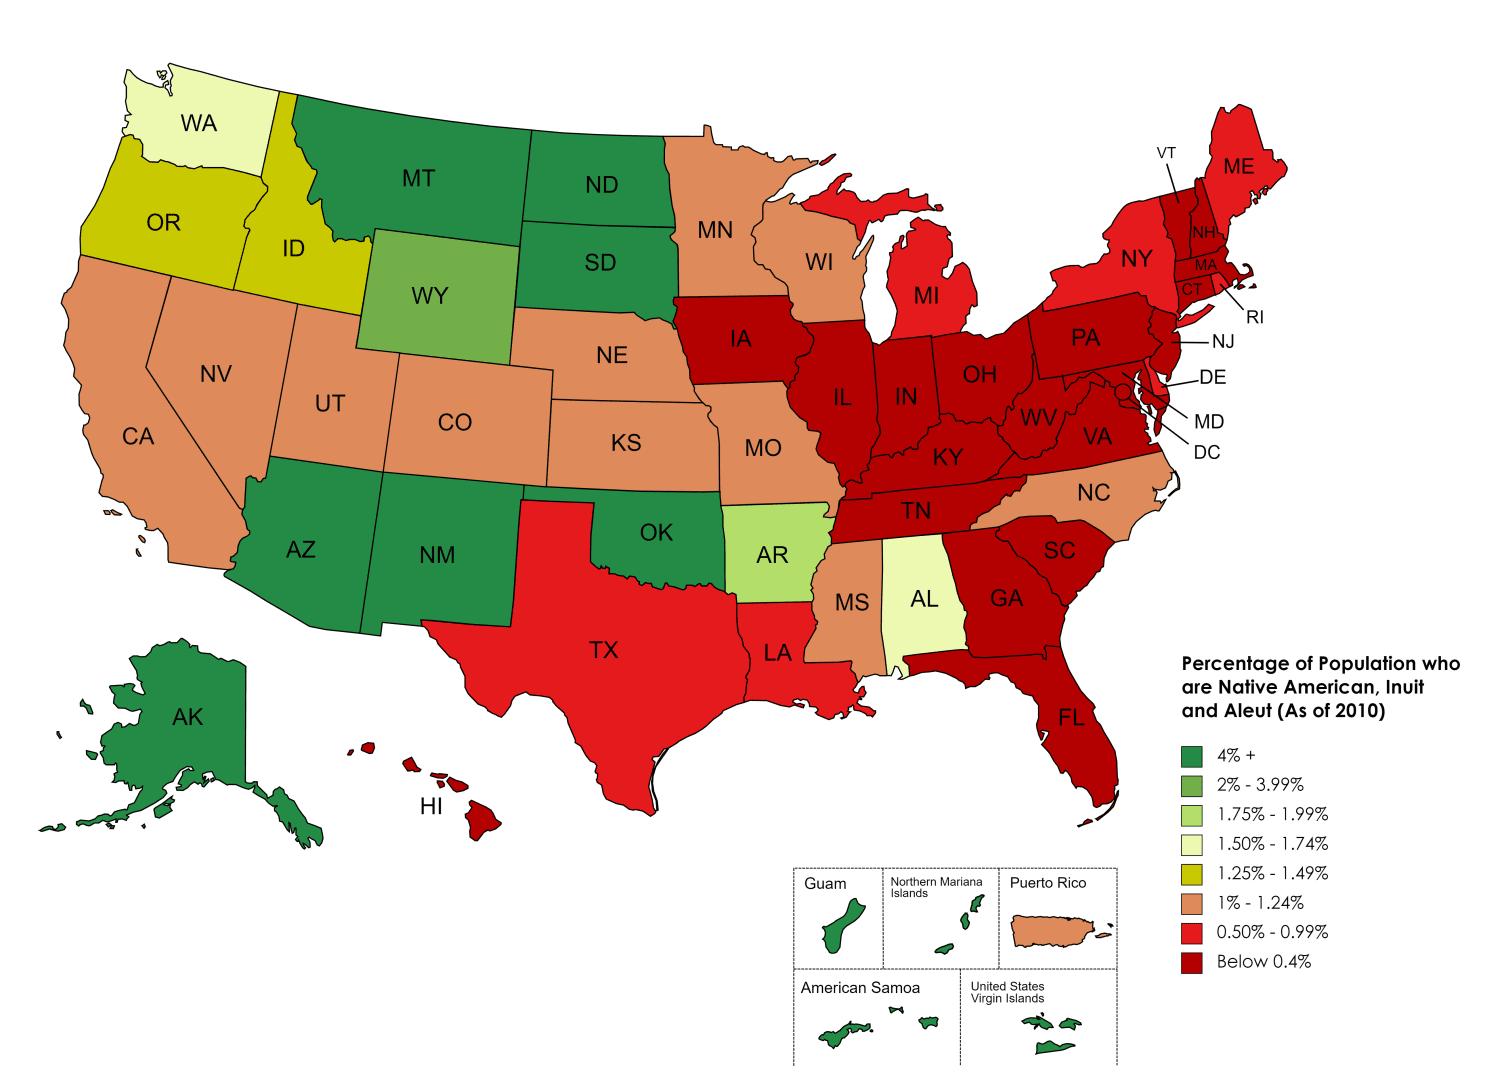 Percentage of Native Americans by State